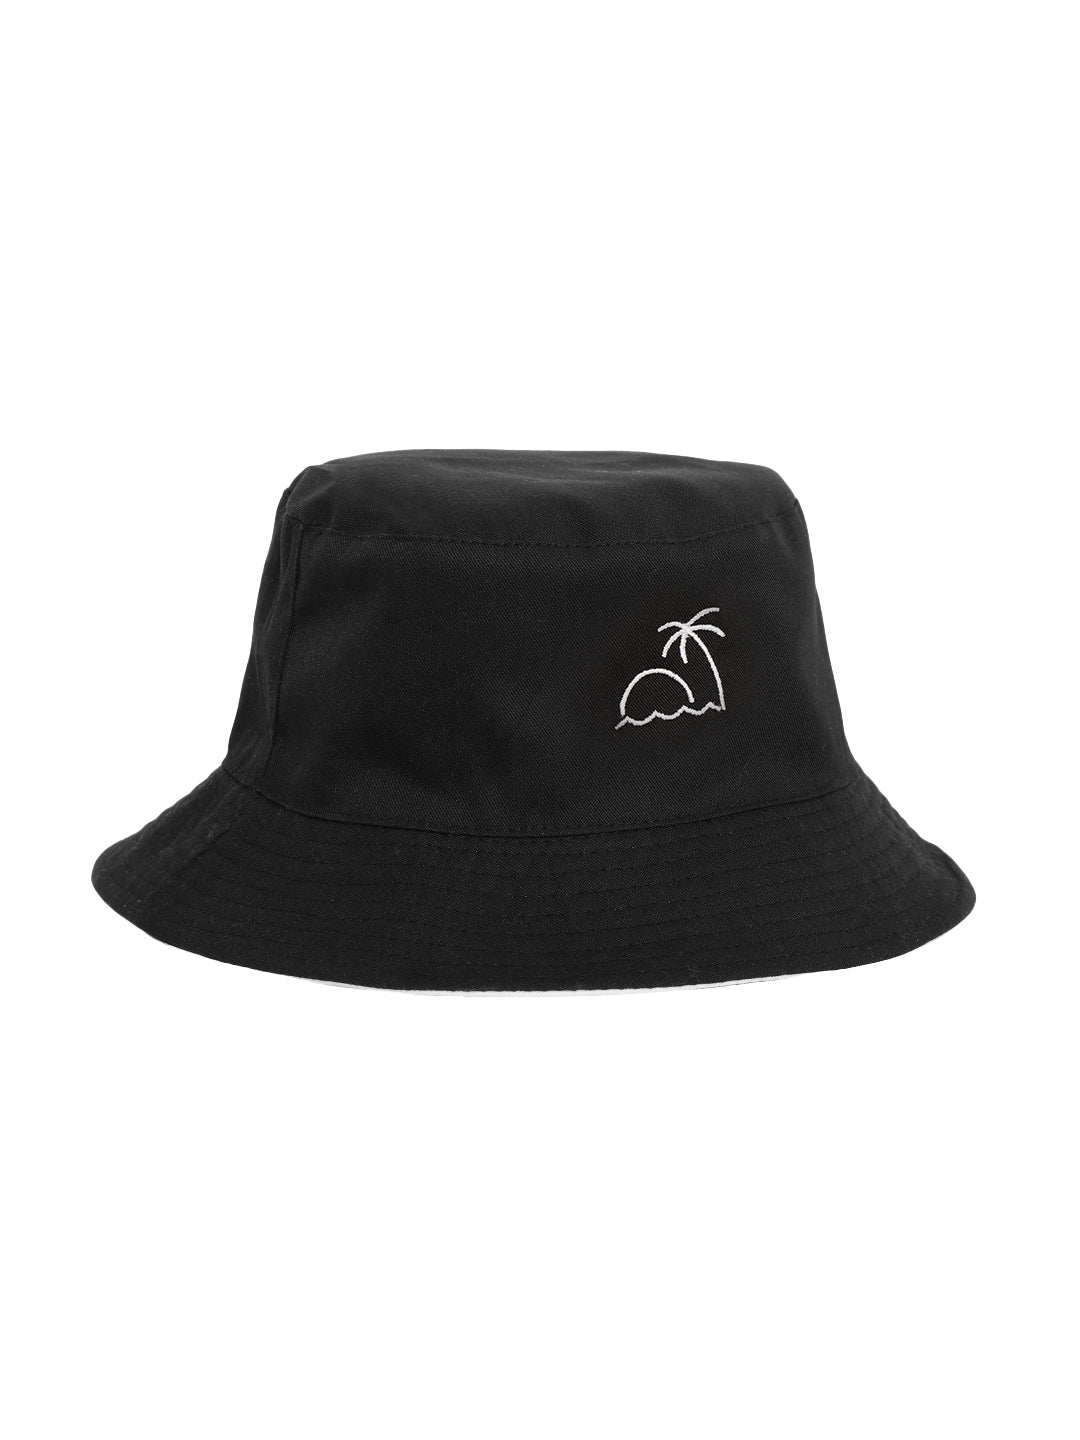 Blueberry black and white embroidery reversible bucket hat